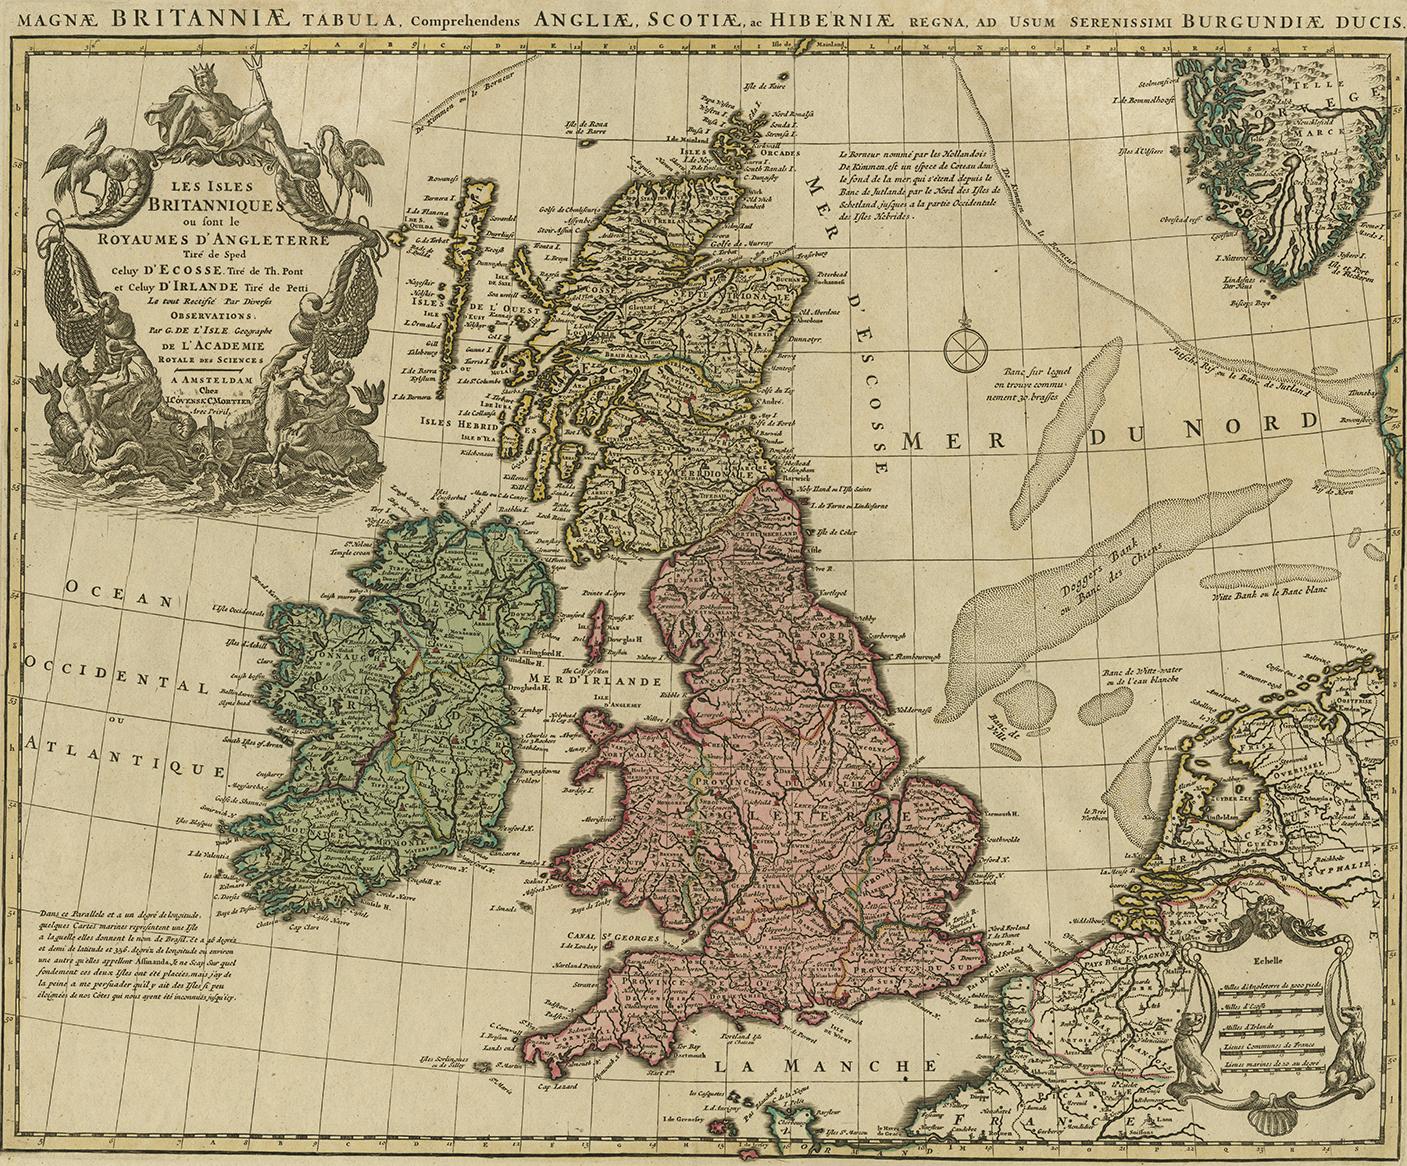 Covens and Mortier's attractive double-page engraved map of the British Isles, based on the 1702 De L'Isle map. The map features a large cartouche in the upper left comprised of numerous sea-related elements and topped by Poseidon.